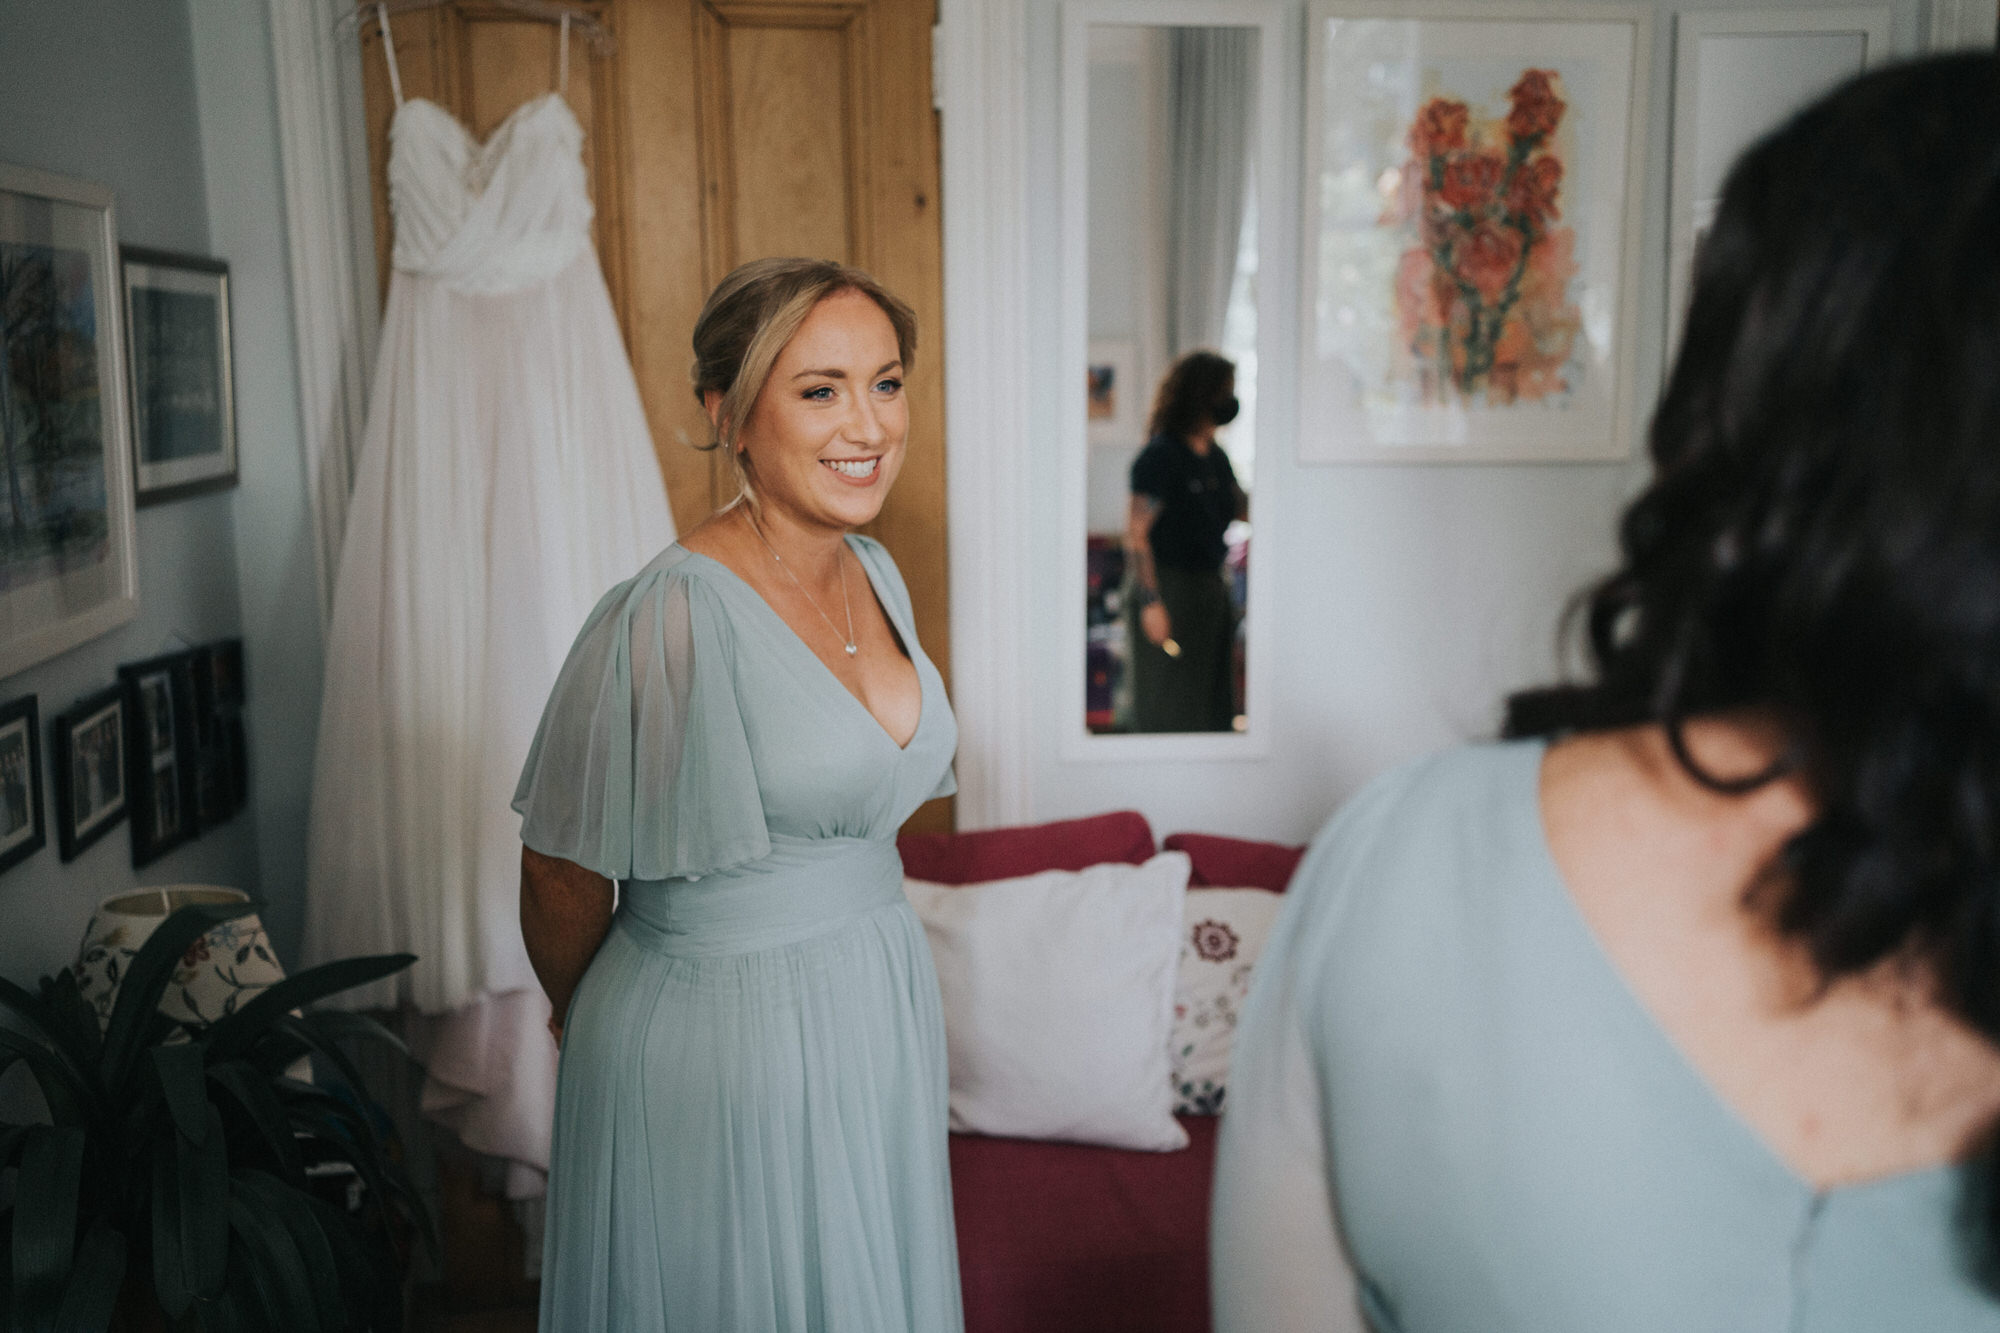 A bridesmaid smiles as she chats to another bridesmaid